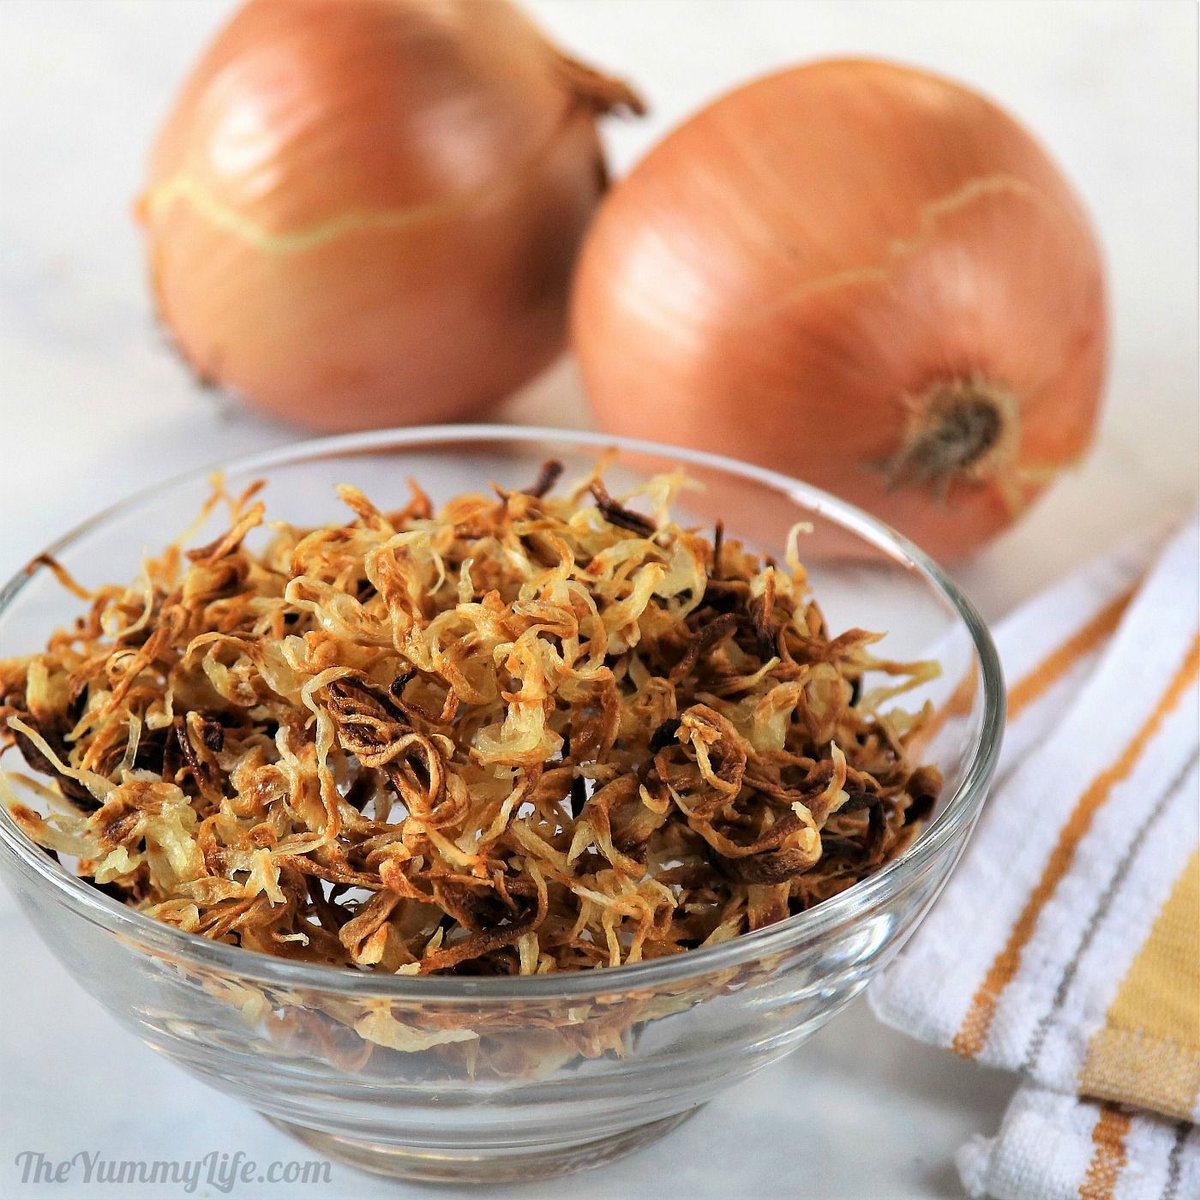 #Fried_Onion Market #Insights 2023 𝐆𝐞𝐭 𝐌𝐨𝐫𝐞 𝐈𝐧𝐬𝐢𝐠𝐡𝐭𝐬 𝐚𝐧𝐝 𝐃𝐞𝐭𝐚𝐢𝐥𝐞𝐝 𝐏𝐃𝐅@  lnkd.in/dGZYmnyr #friedonion #crispyonion #oniontoppings #cookingessentials #onionrecipes #foodgarnish #cookingingredients #friedfood #foodiefavorites #ra #researchallied